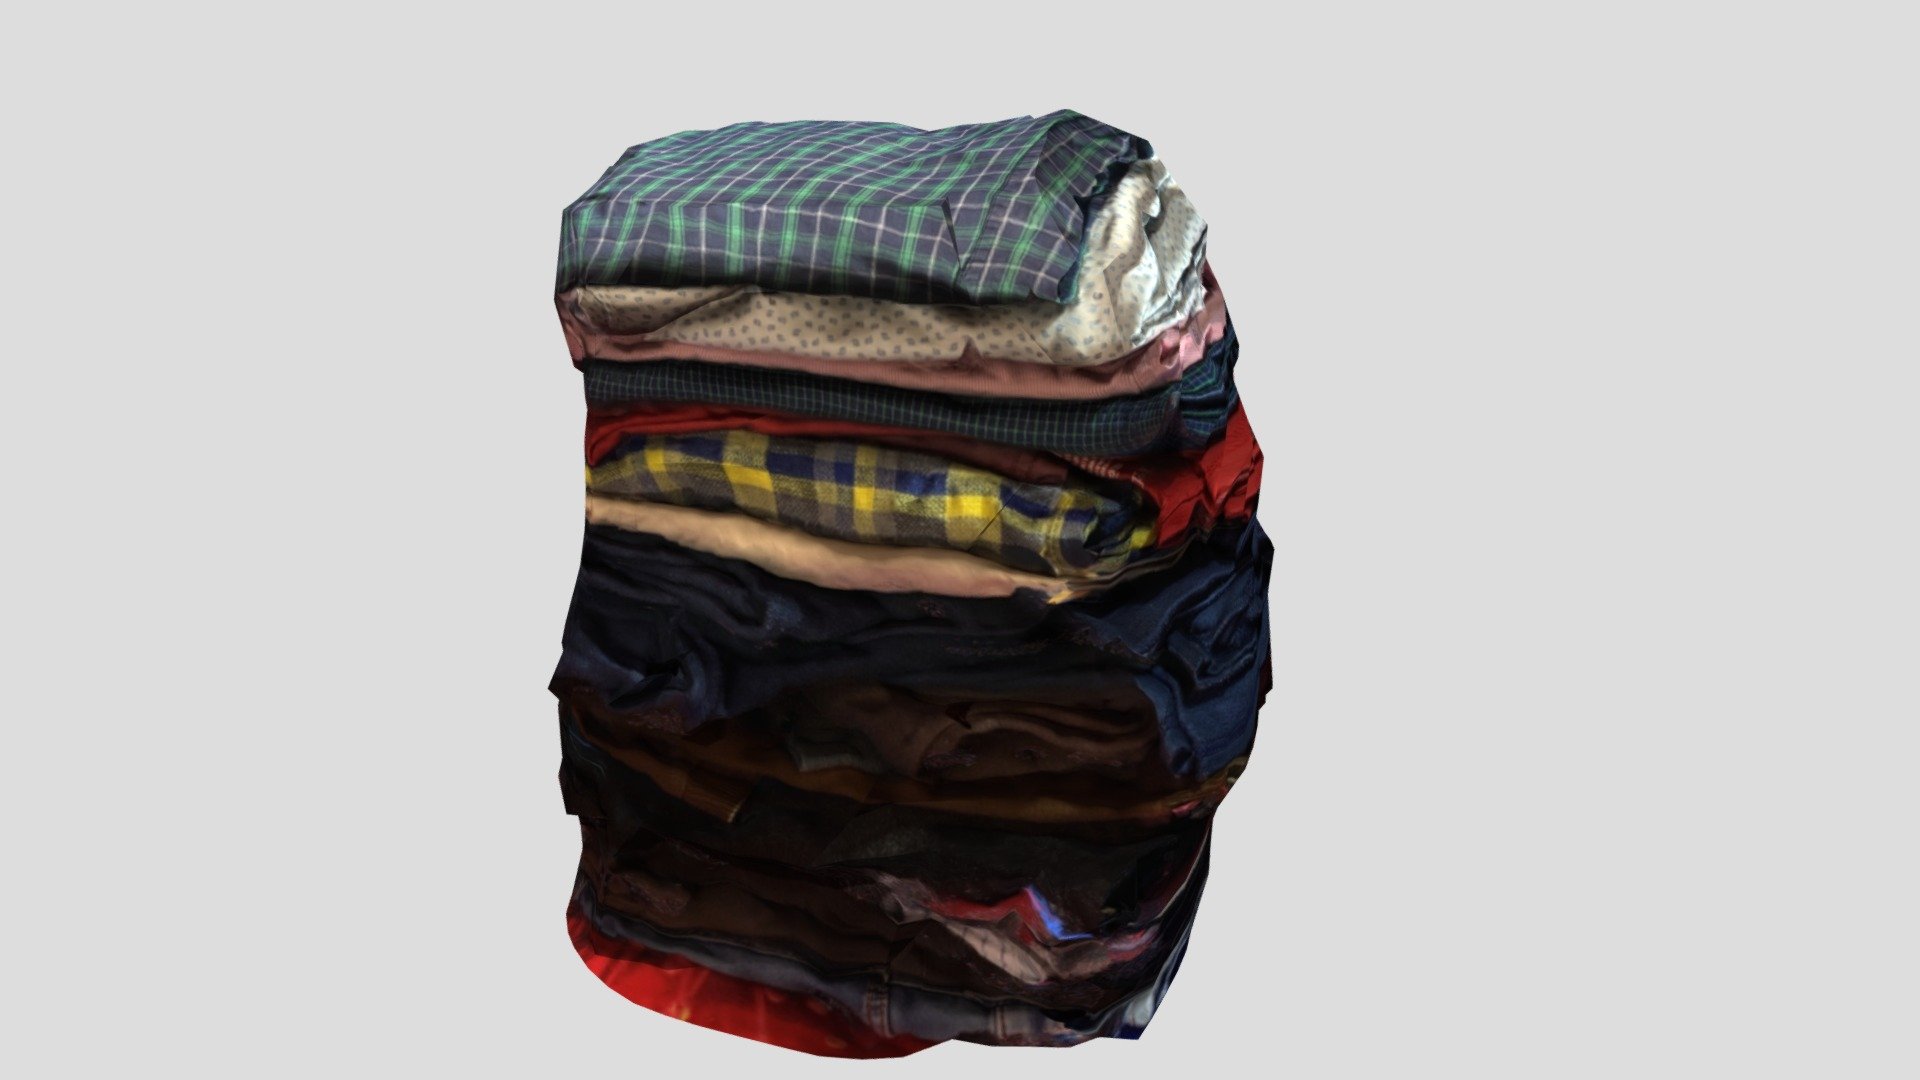 Contact - ujjvalvfxartist9211@gmail.com - Very Small Pile Of Cloth - 3D model by Ujjval Singhal (@ujjvalvfxartist9211) 3d model